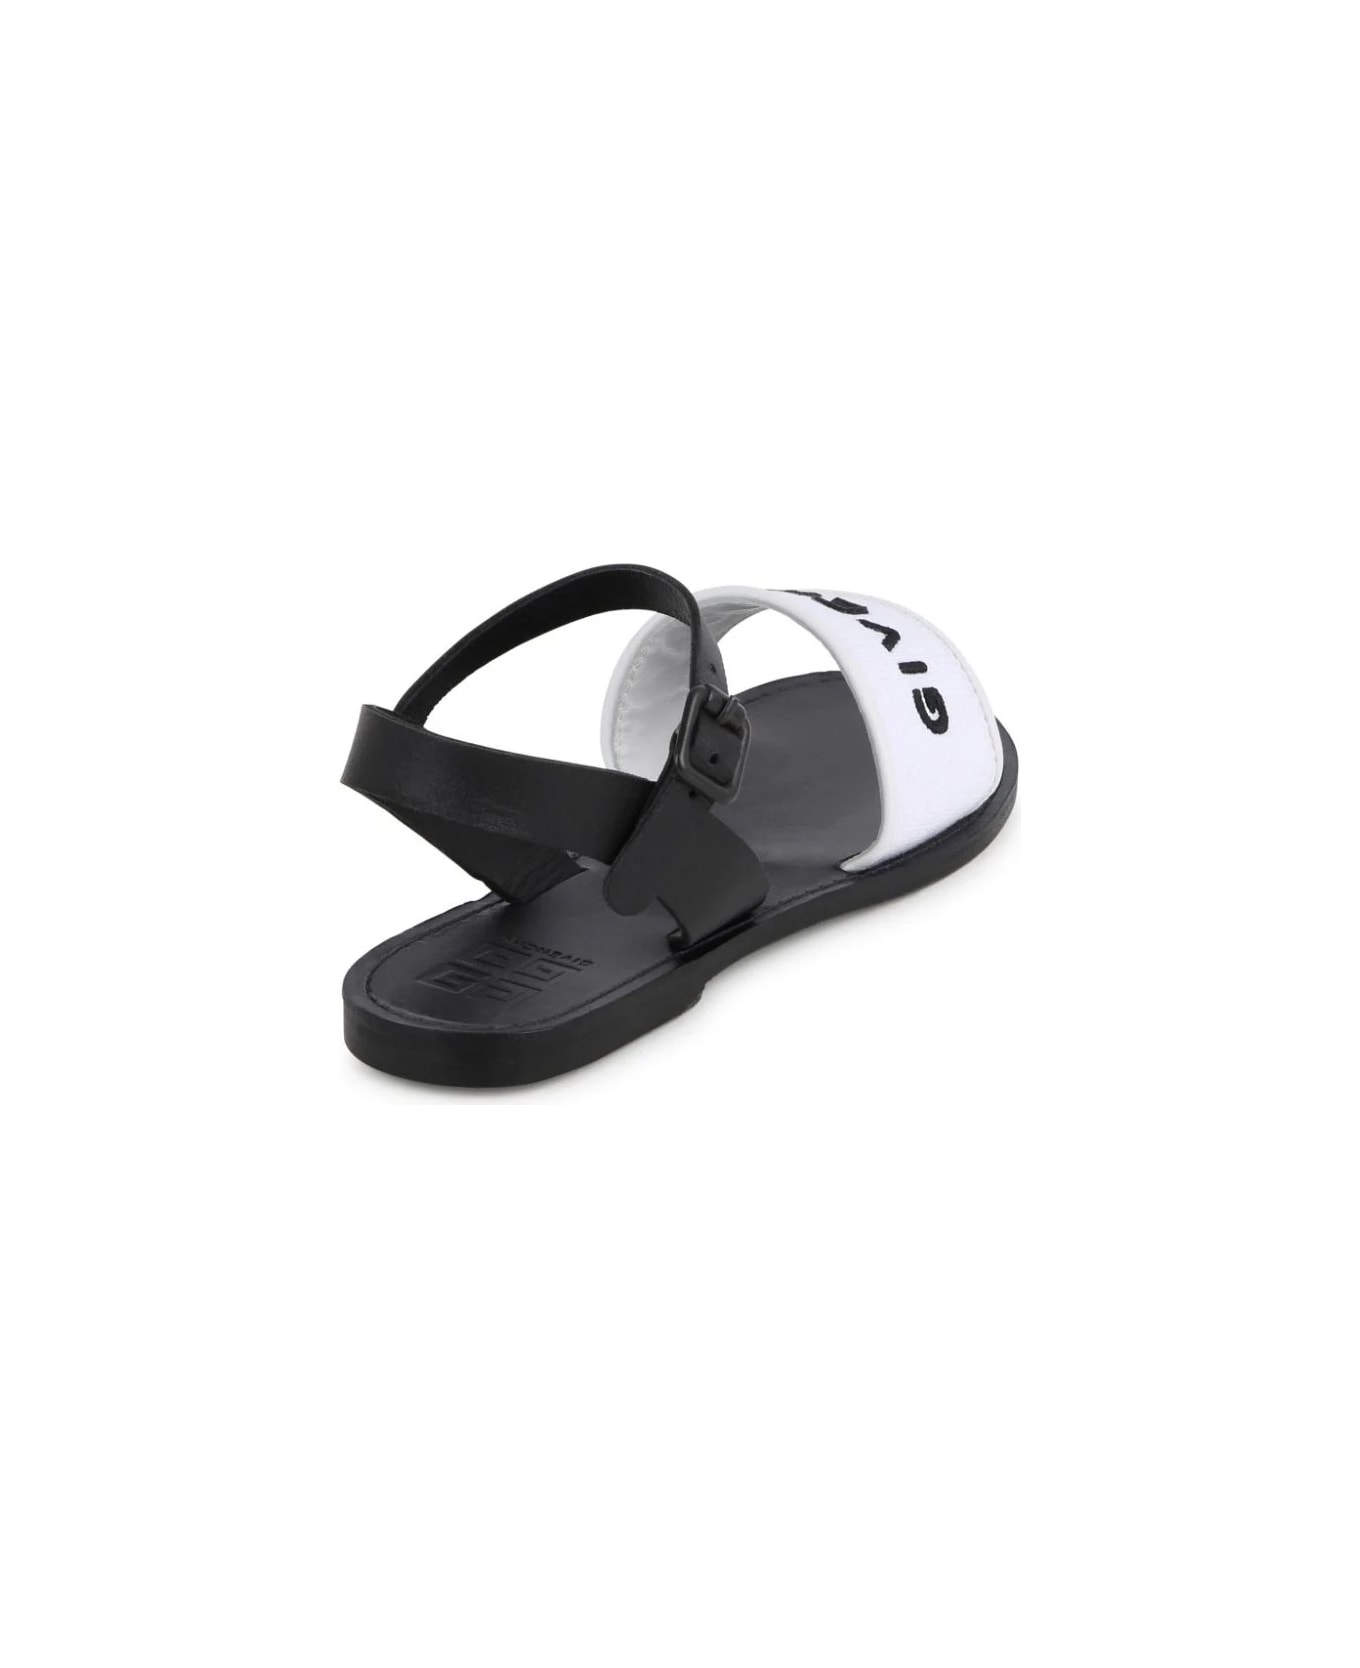 Givenchy Black And White Sandals With Logo - Black